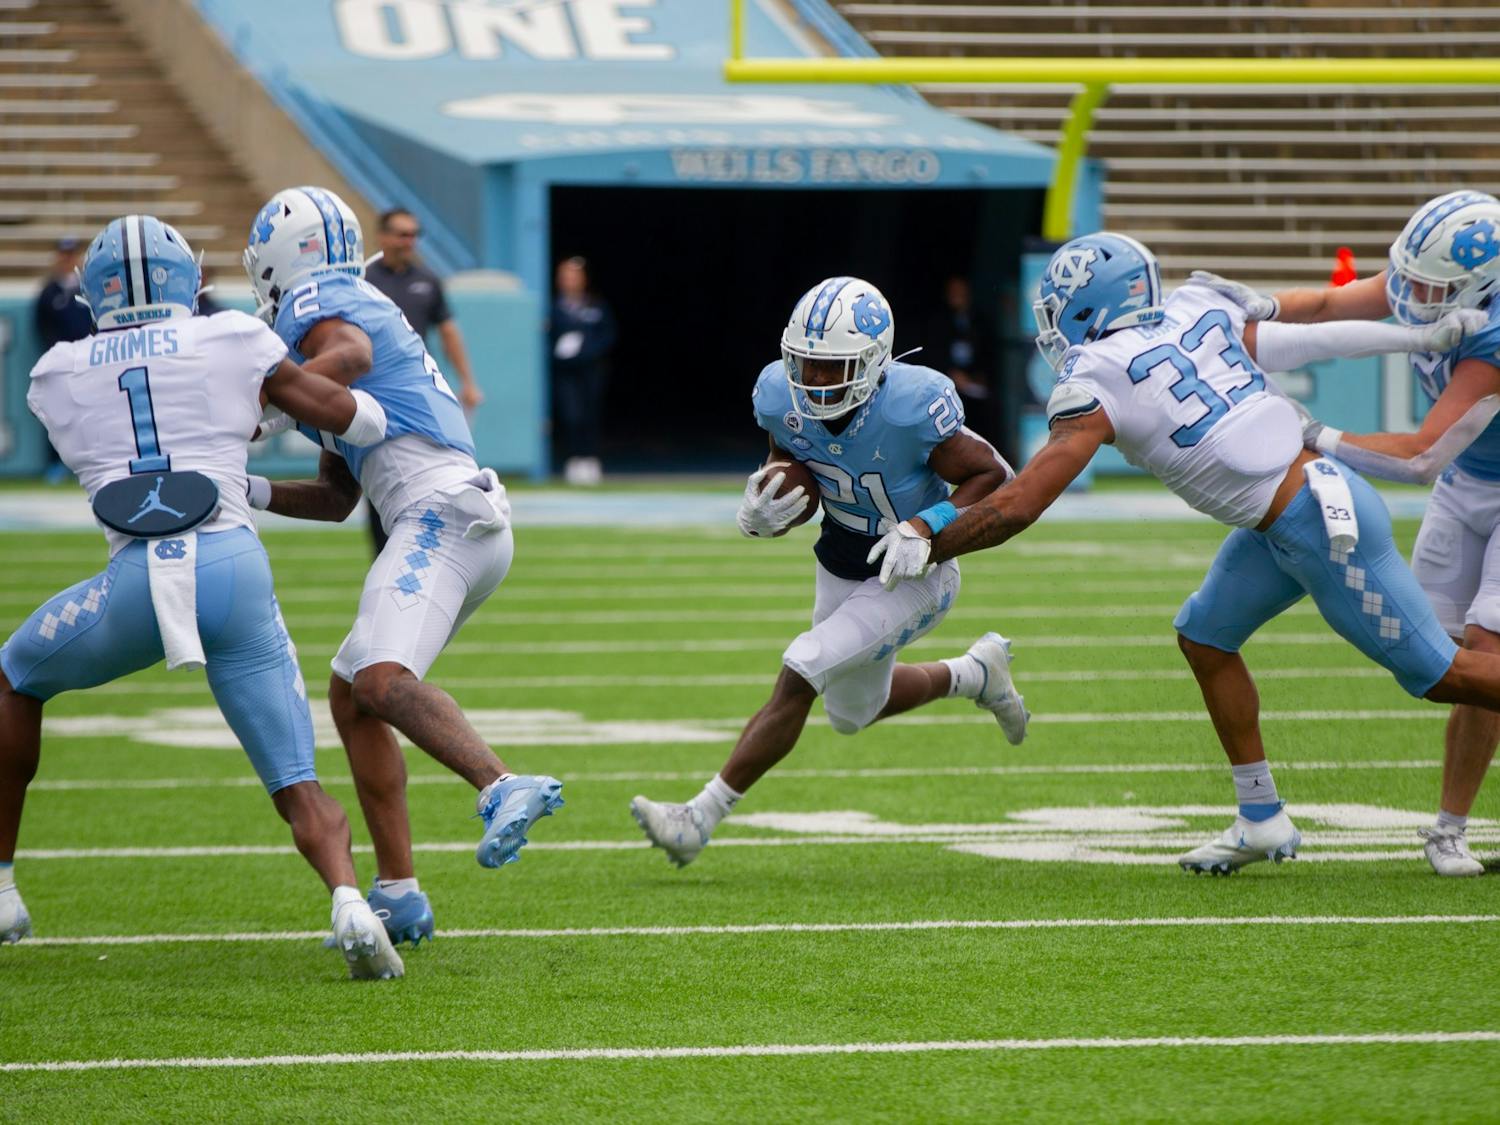 Elijah Green (21), sophomore running back, makes a play during UNC football's spring scrimmage on April 9, 2022, in Chapel Hill, NC.